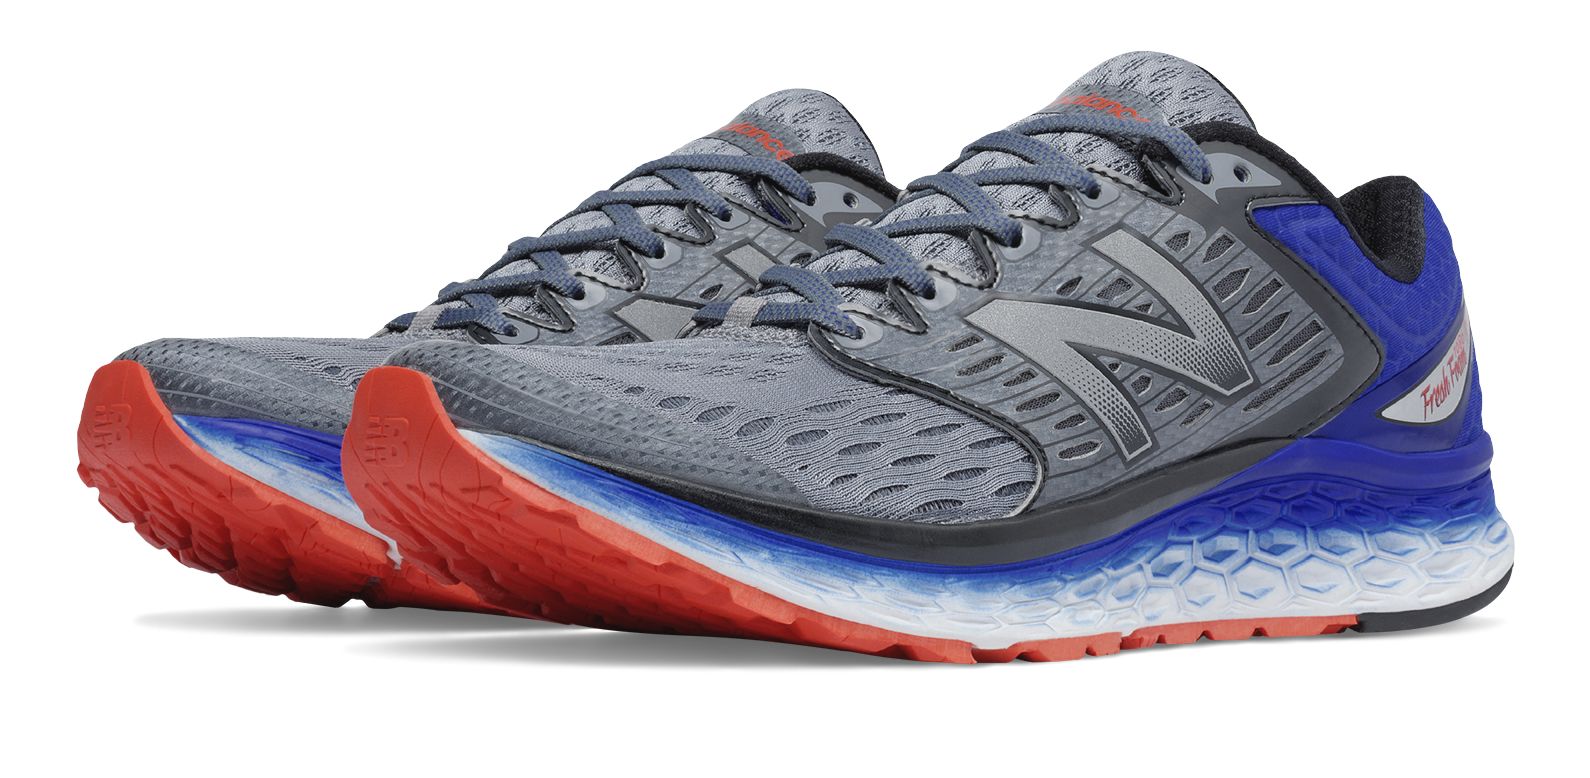 New Balance M1080-V6 on Sale - Discounts Up to 53% Off on M1080SB6 at Joe's New  Balance Outlet